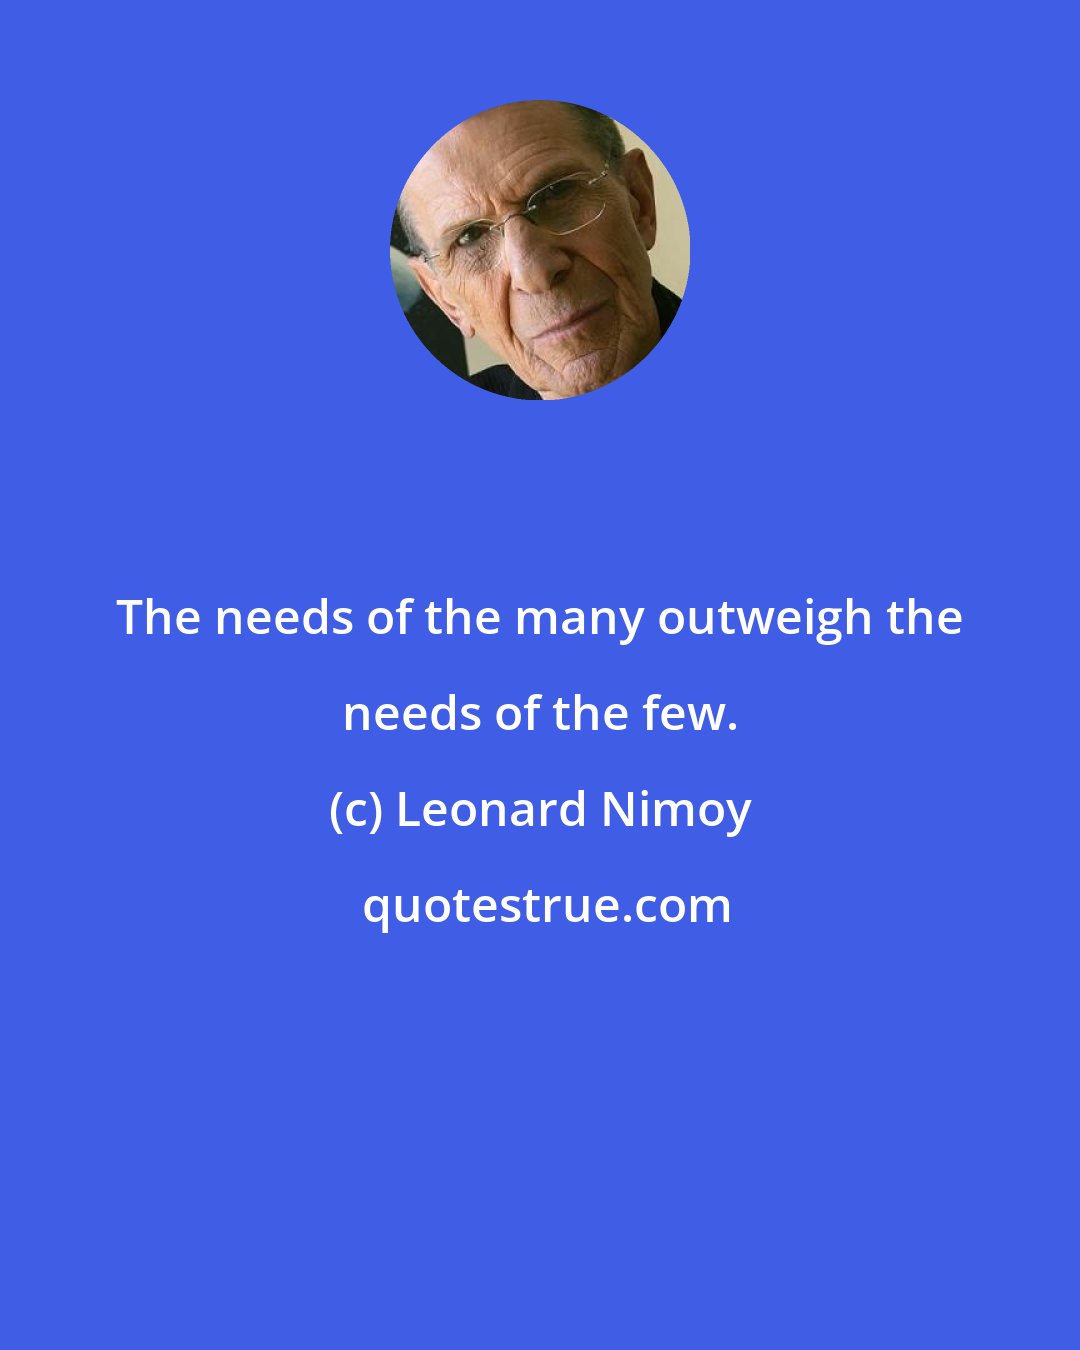 Leonard Nimoy: The needs of the many outweigh the needs of the few.